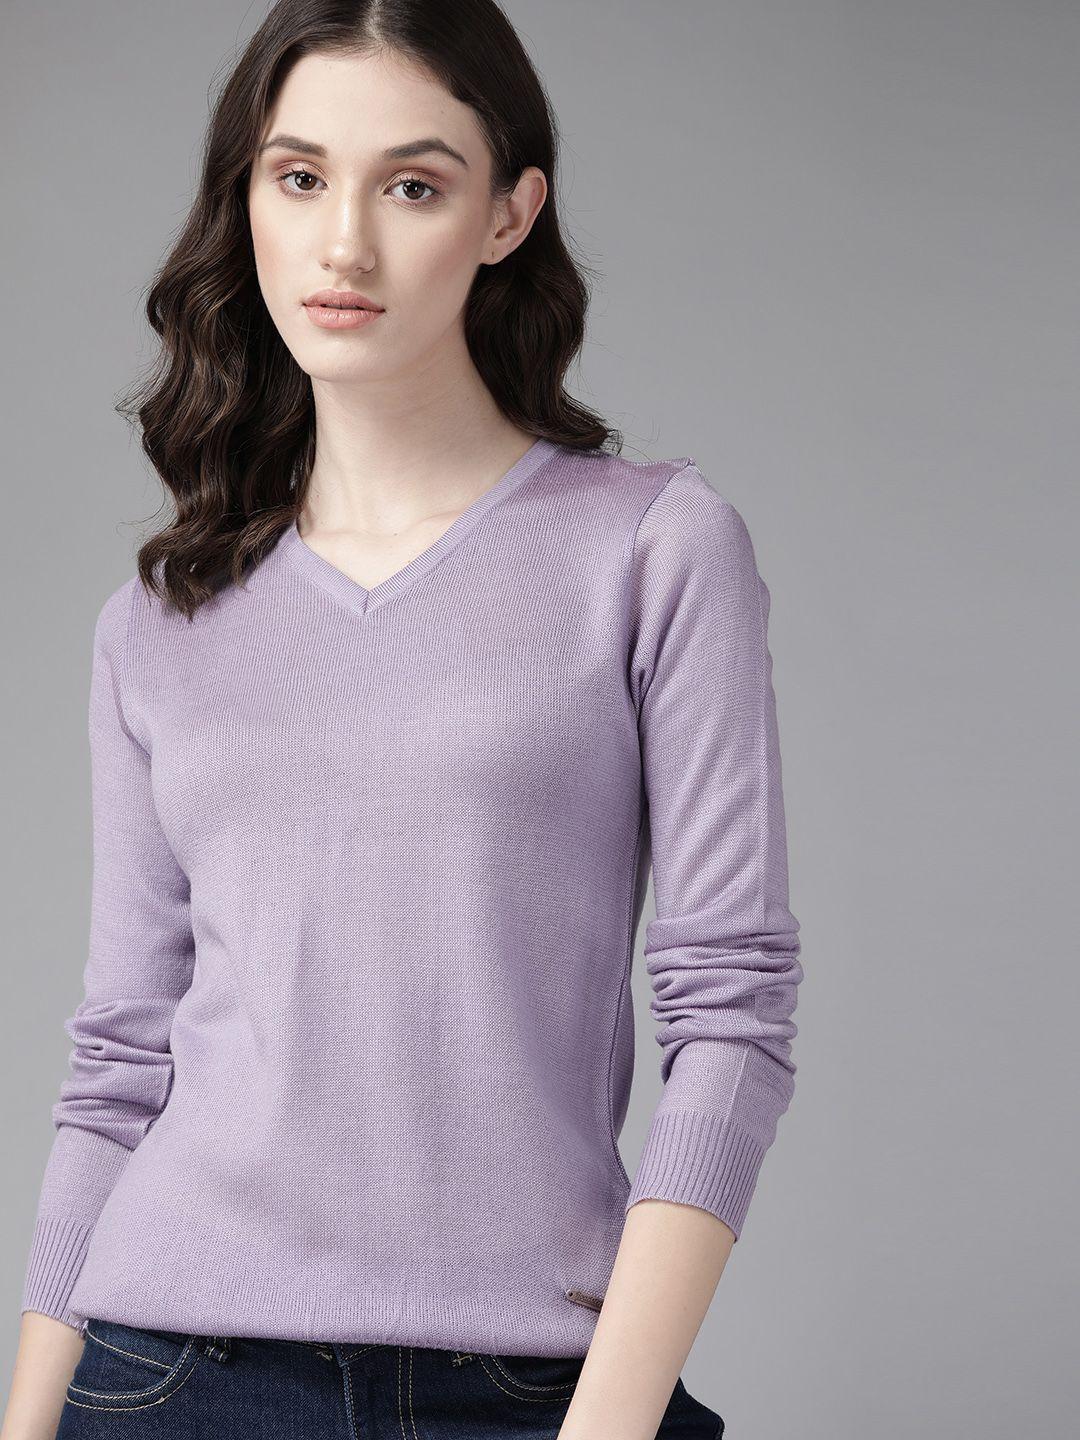 the roadster lifestyle co. women lavender solid acrylic v-neck pullover